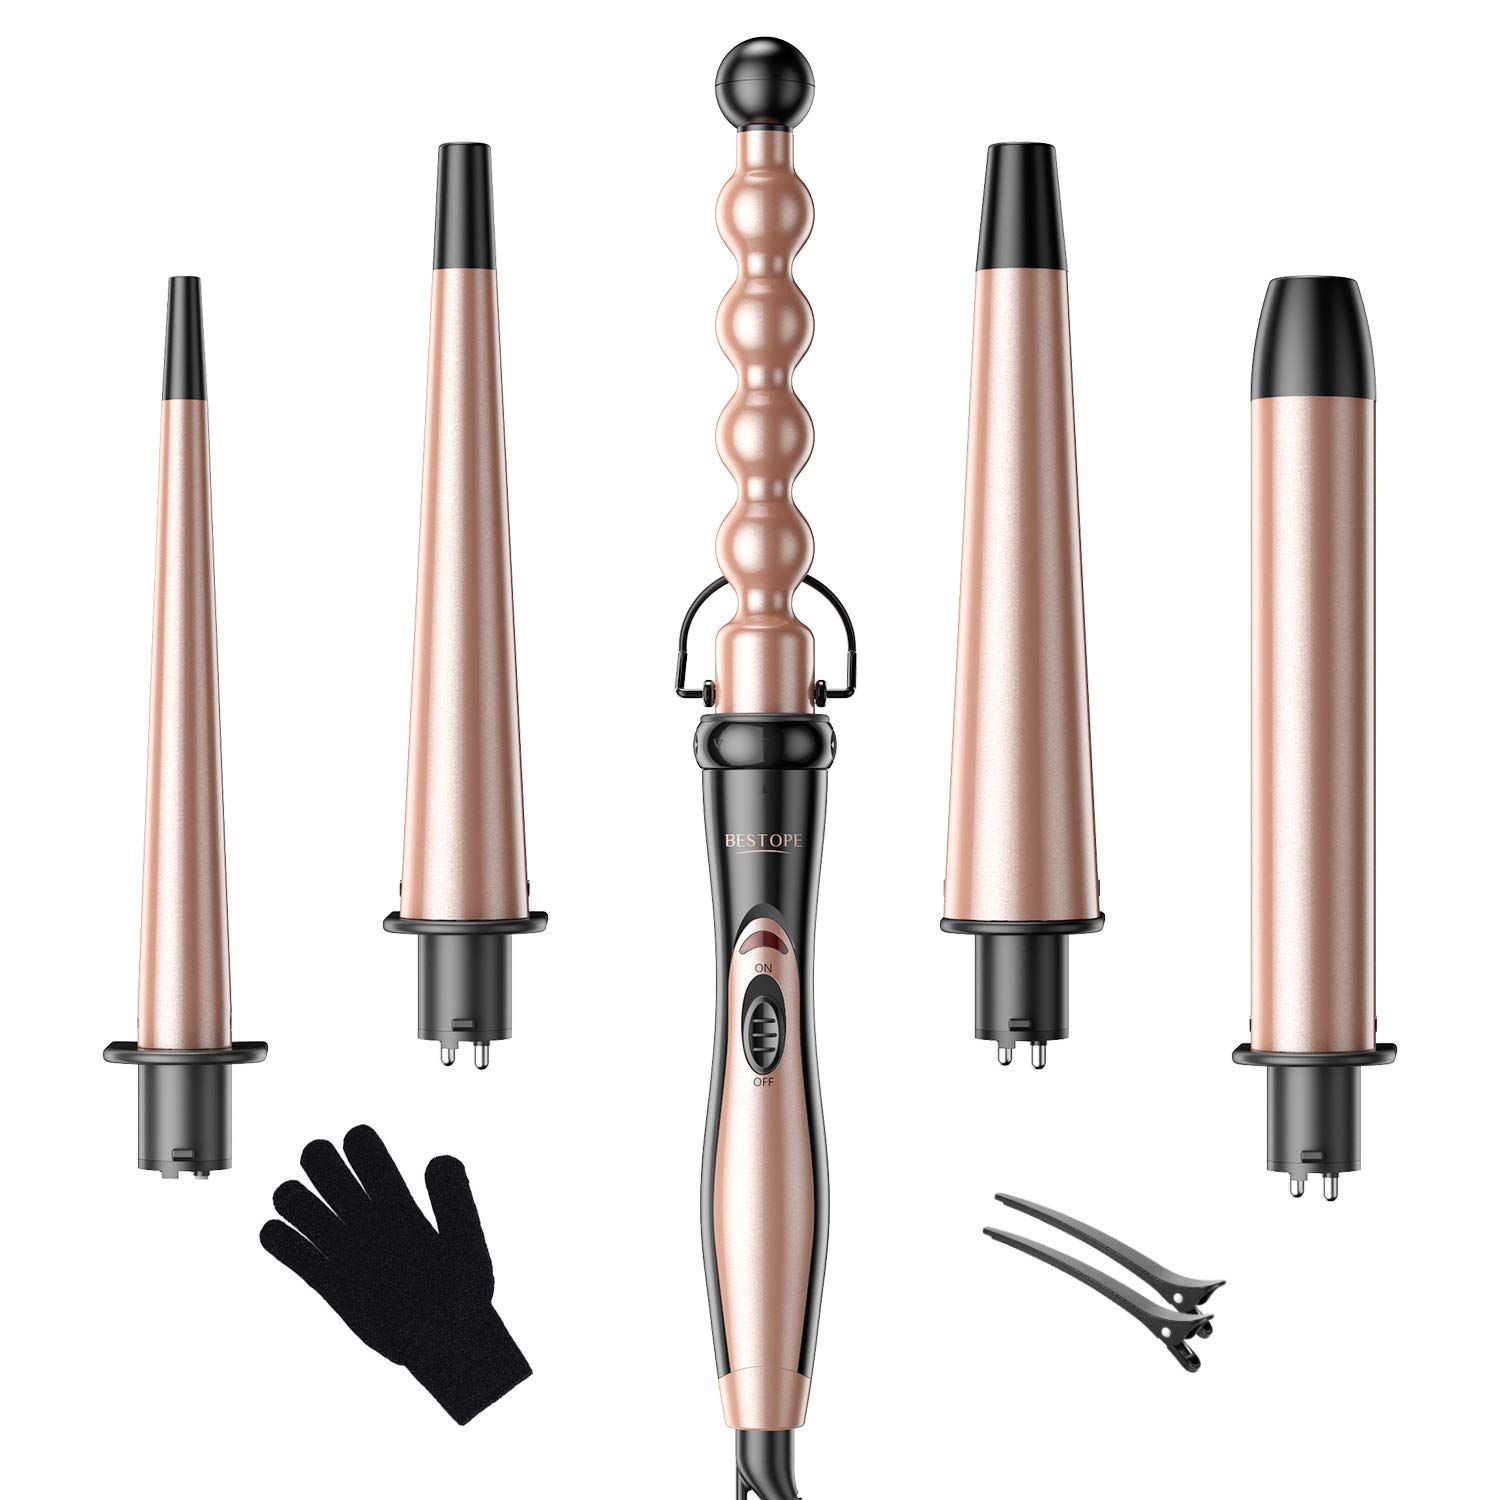 BESTOPE Curling Iron Instant Heat Up Curling Wand Set with 5 Interchangeable Ceramic Barrels(0.35... | Amazon (US)